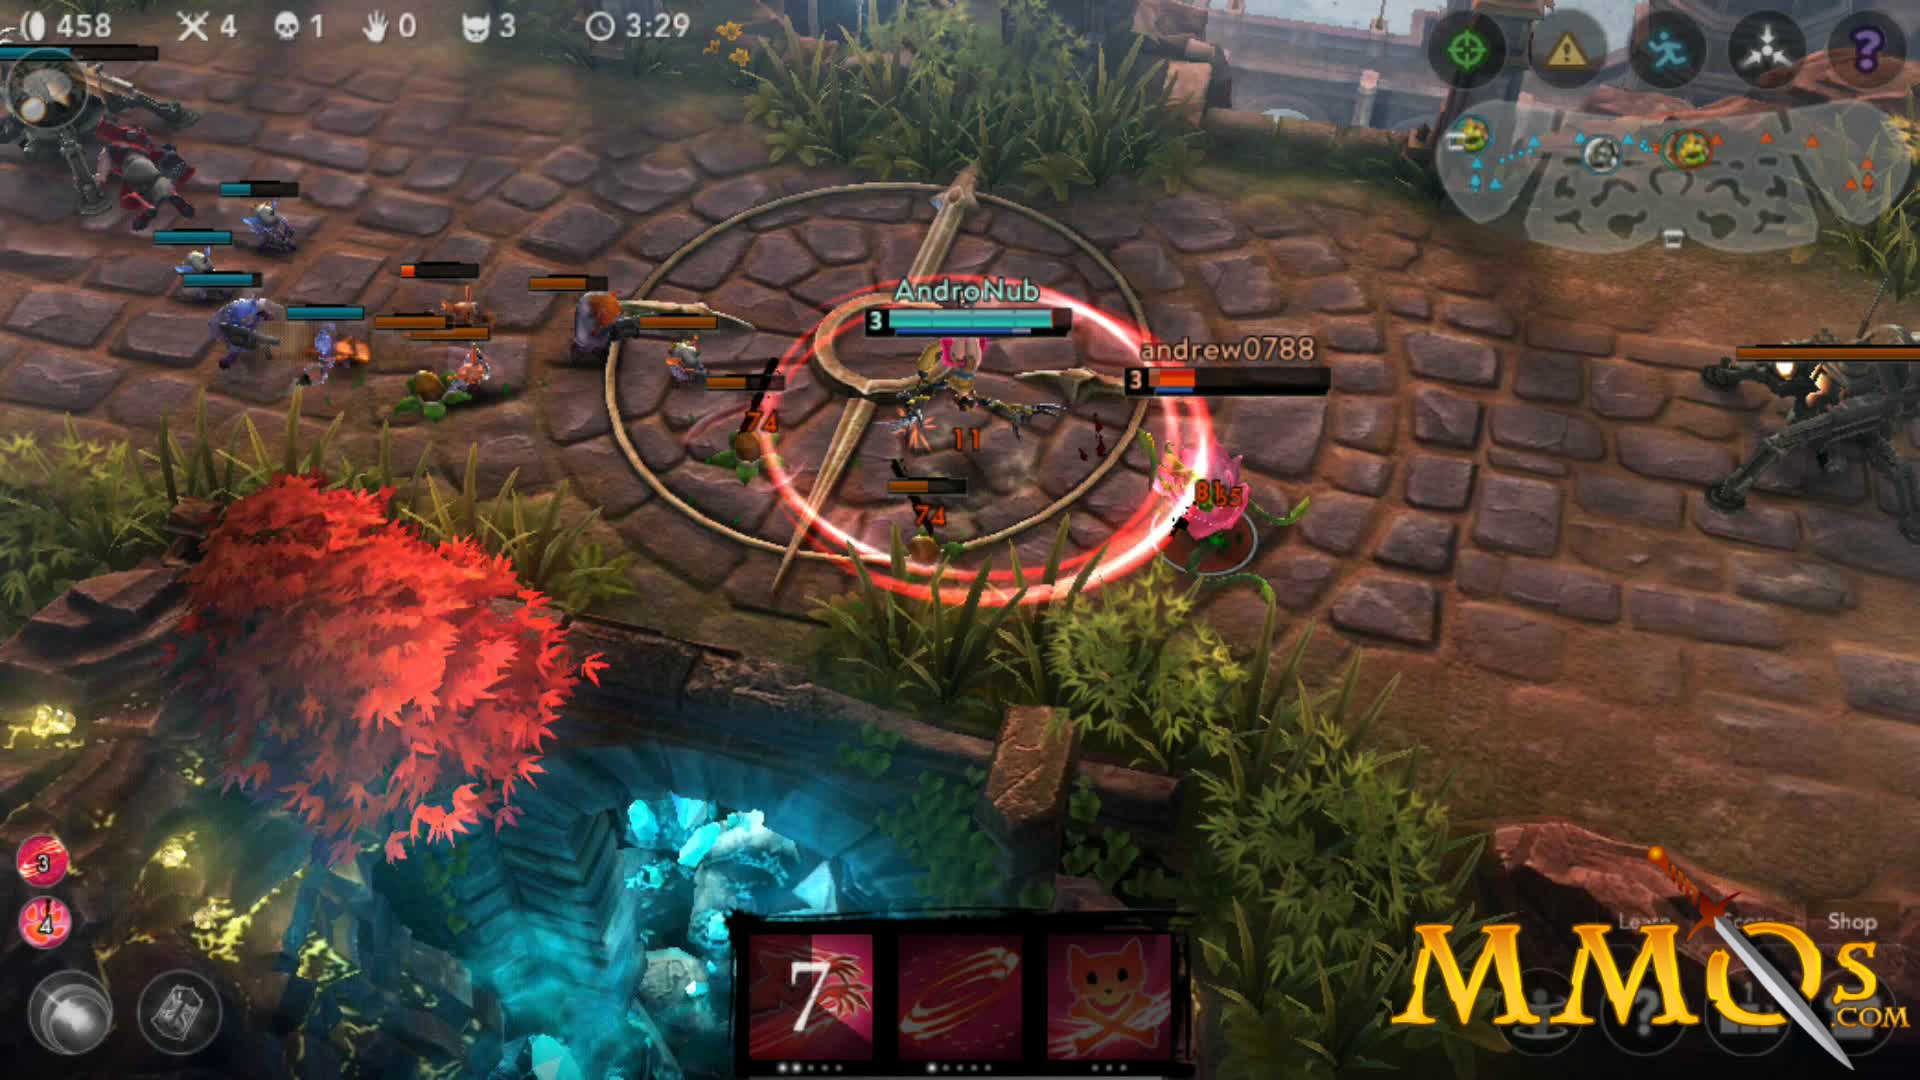 Vainglory Game - Where are Leaderboards? They're still